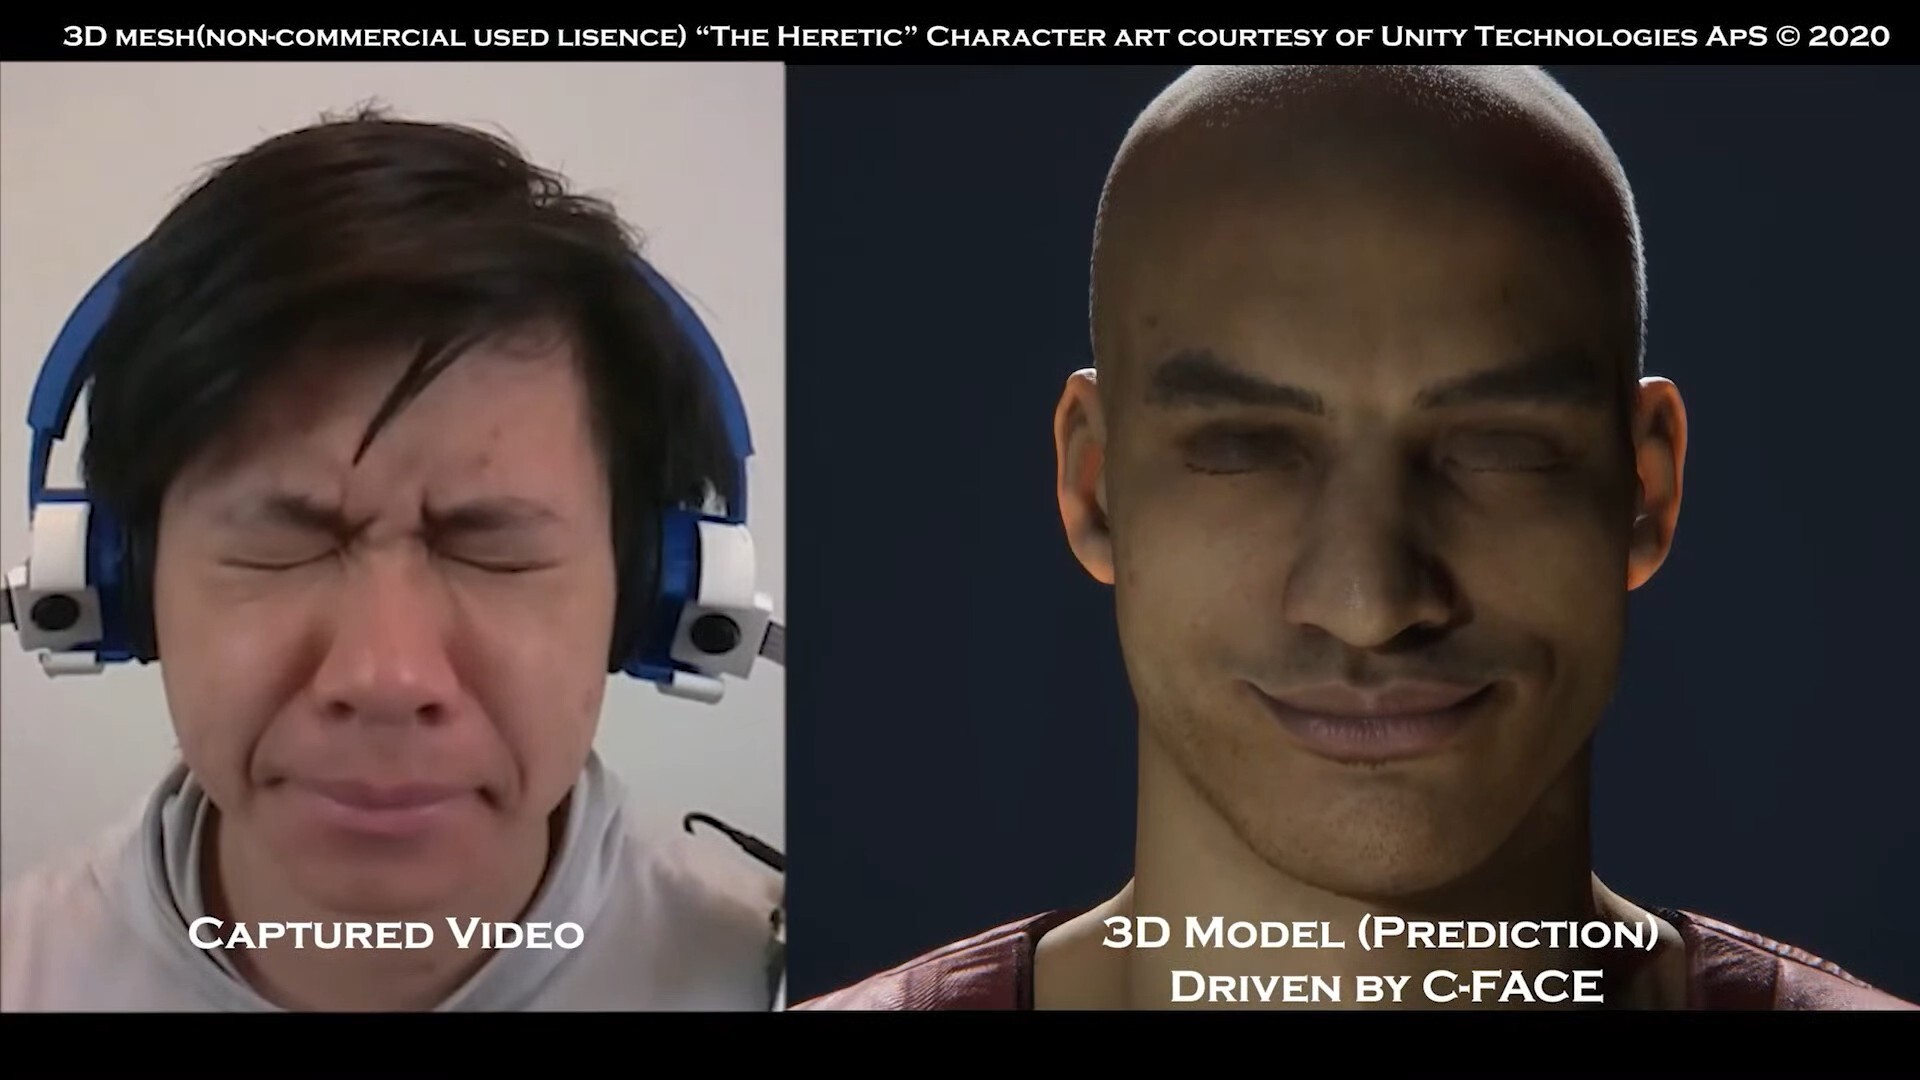 C-Face, an ear-mounted device created by Cornell researchers, can recreate facial expressions of the wearer in an avatar. Image: Screenshot from YouTube/Cheng Zhang